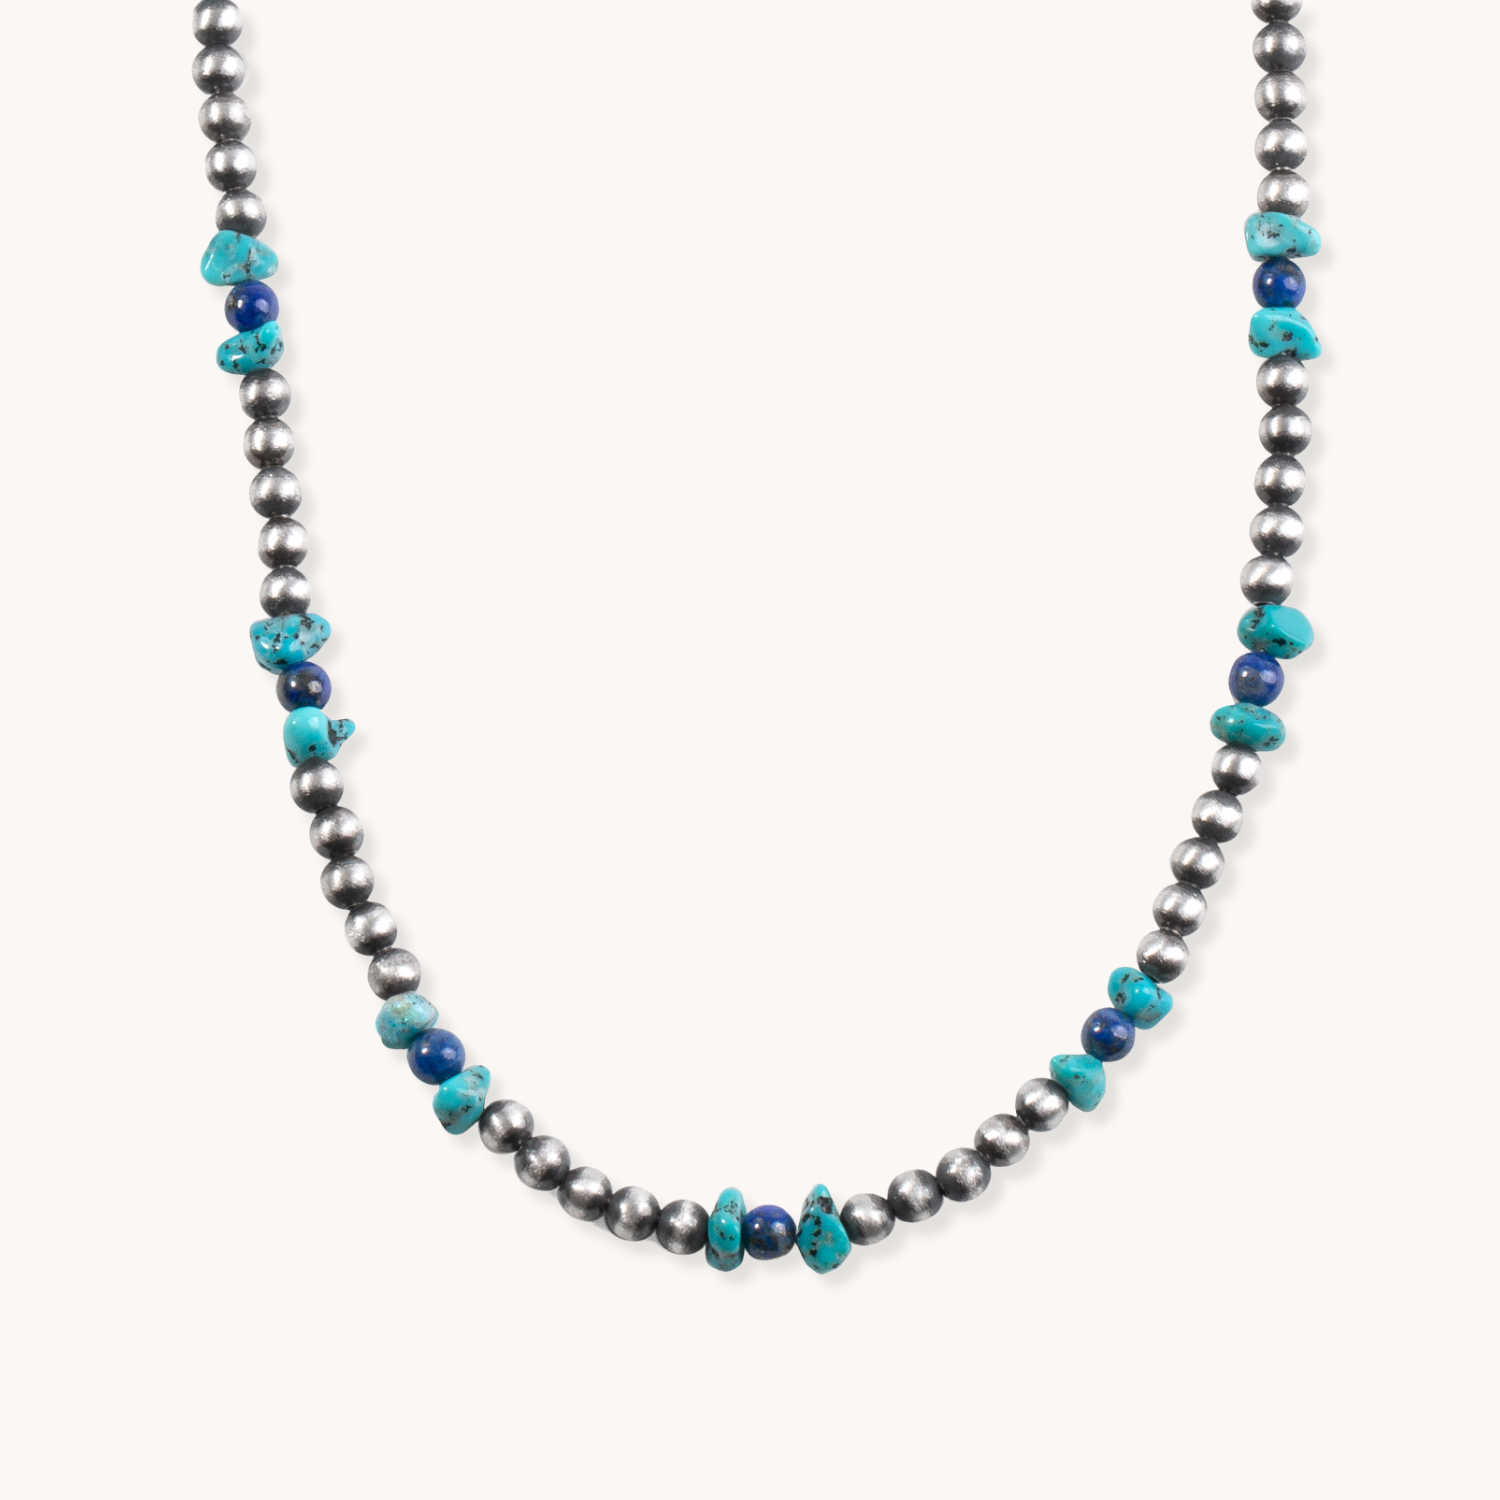 Handcrafted Necklaces Made with Silver Beads and Turquoise